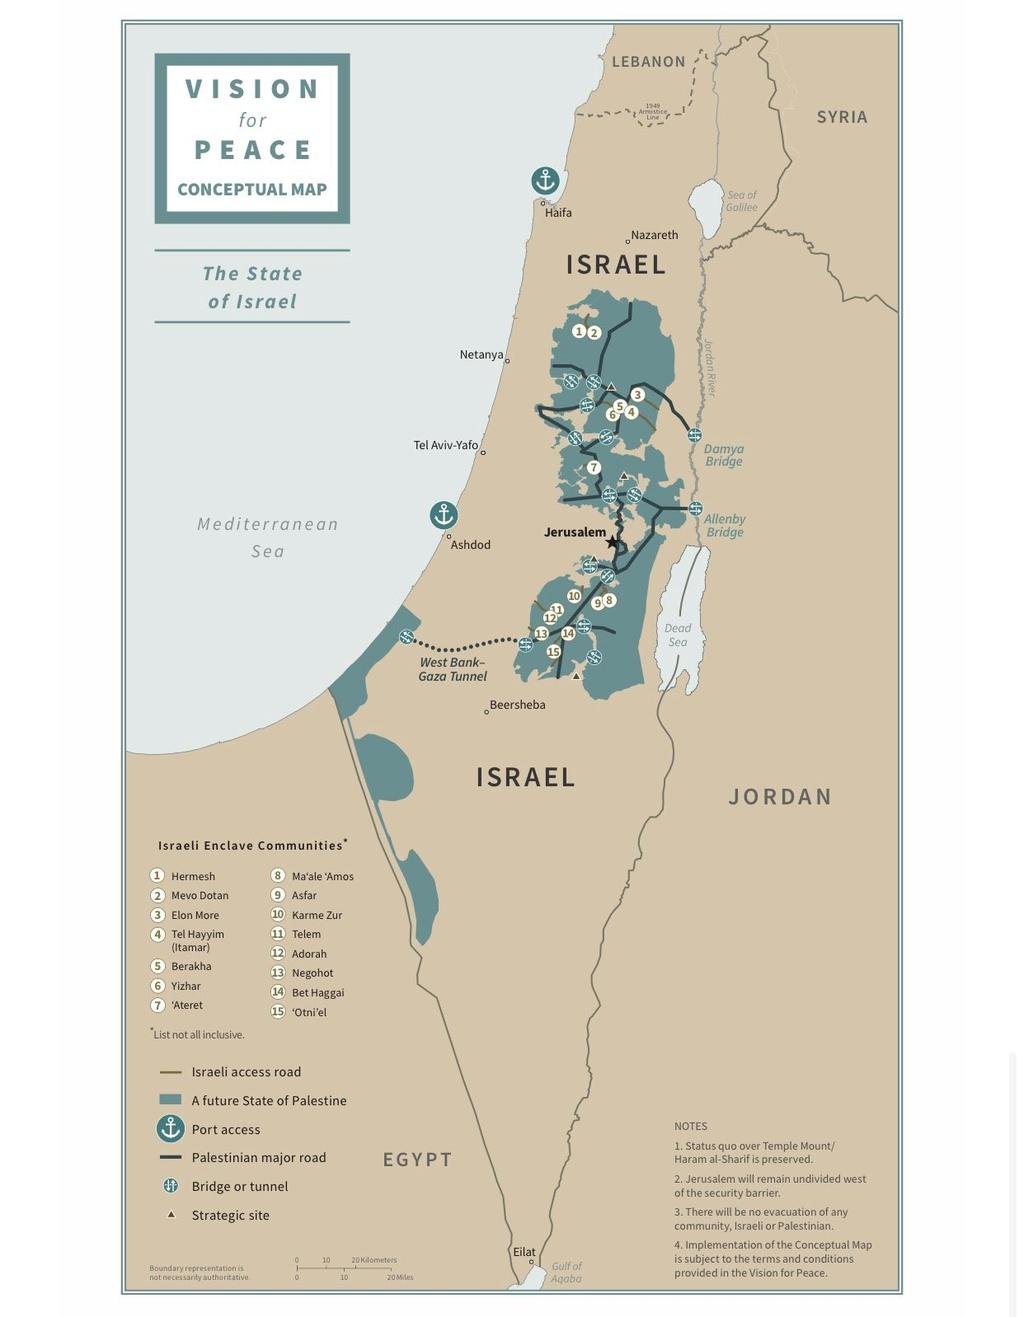 Conceptual map of Israel-Palestine as proposed in Trump peace plan